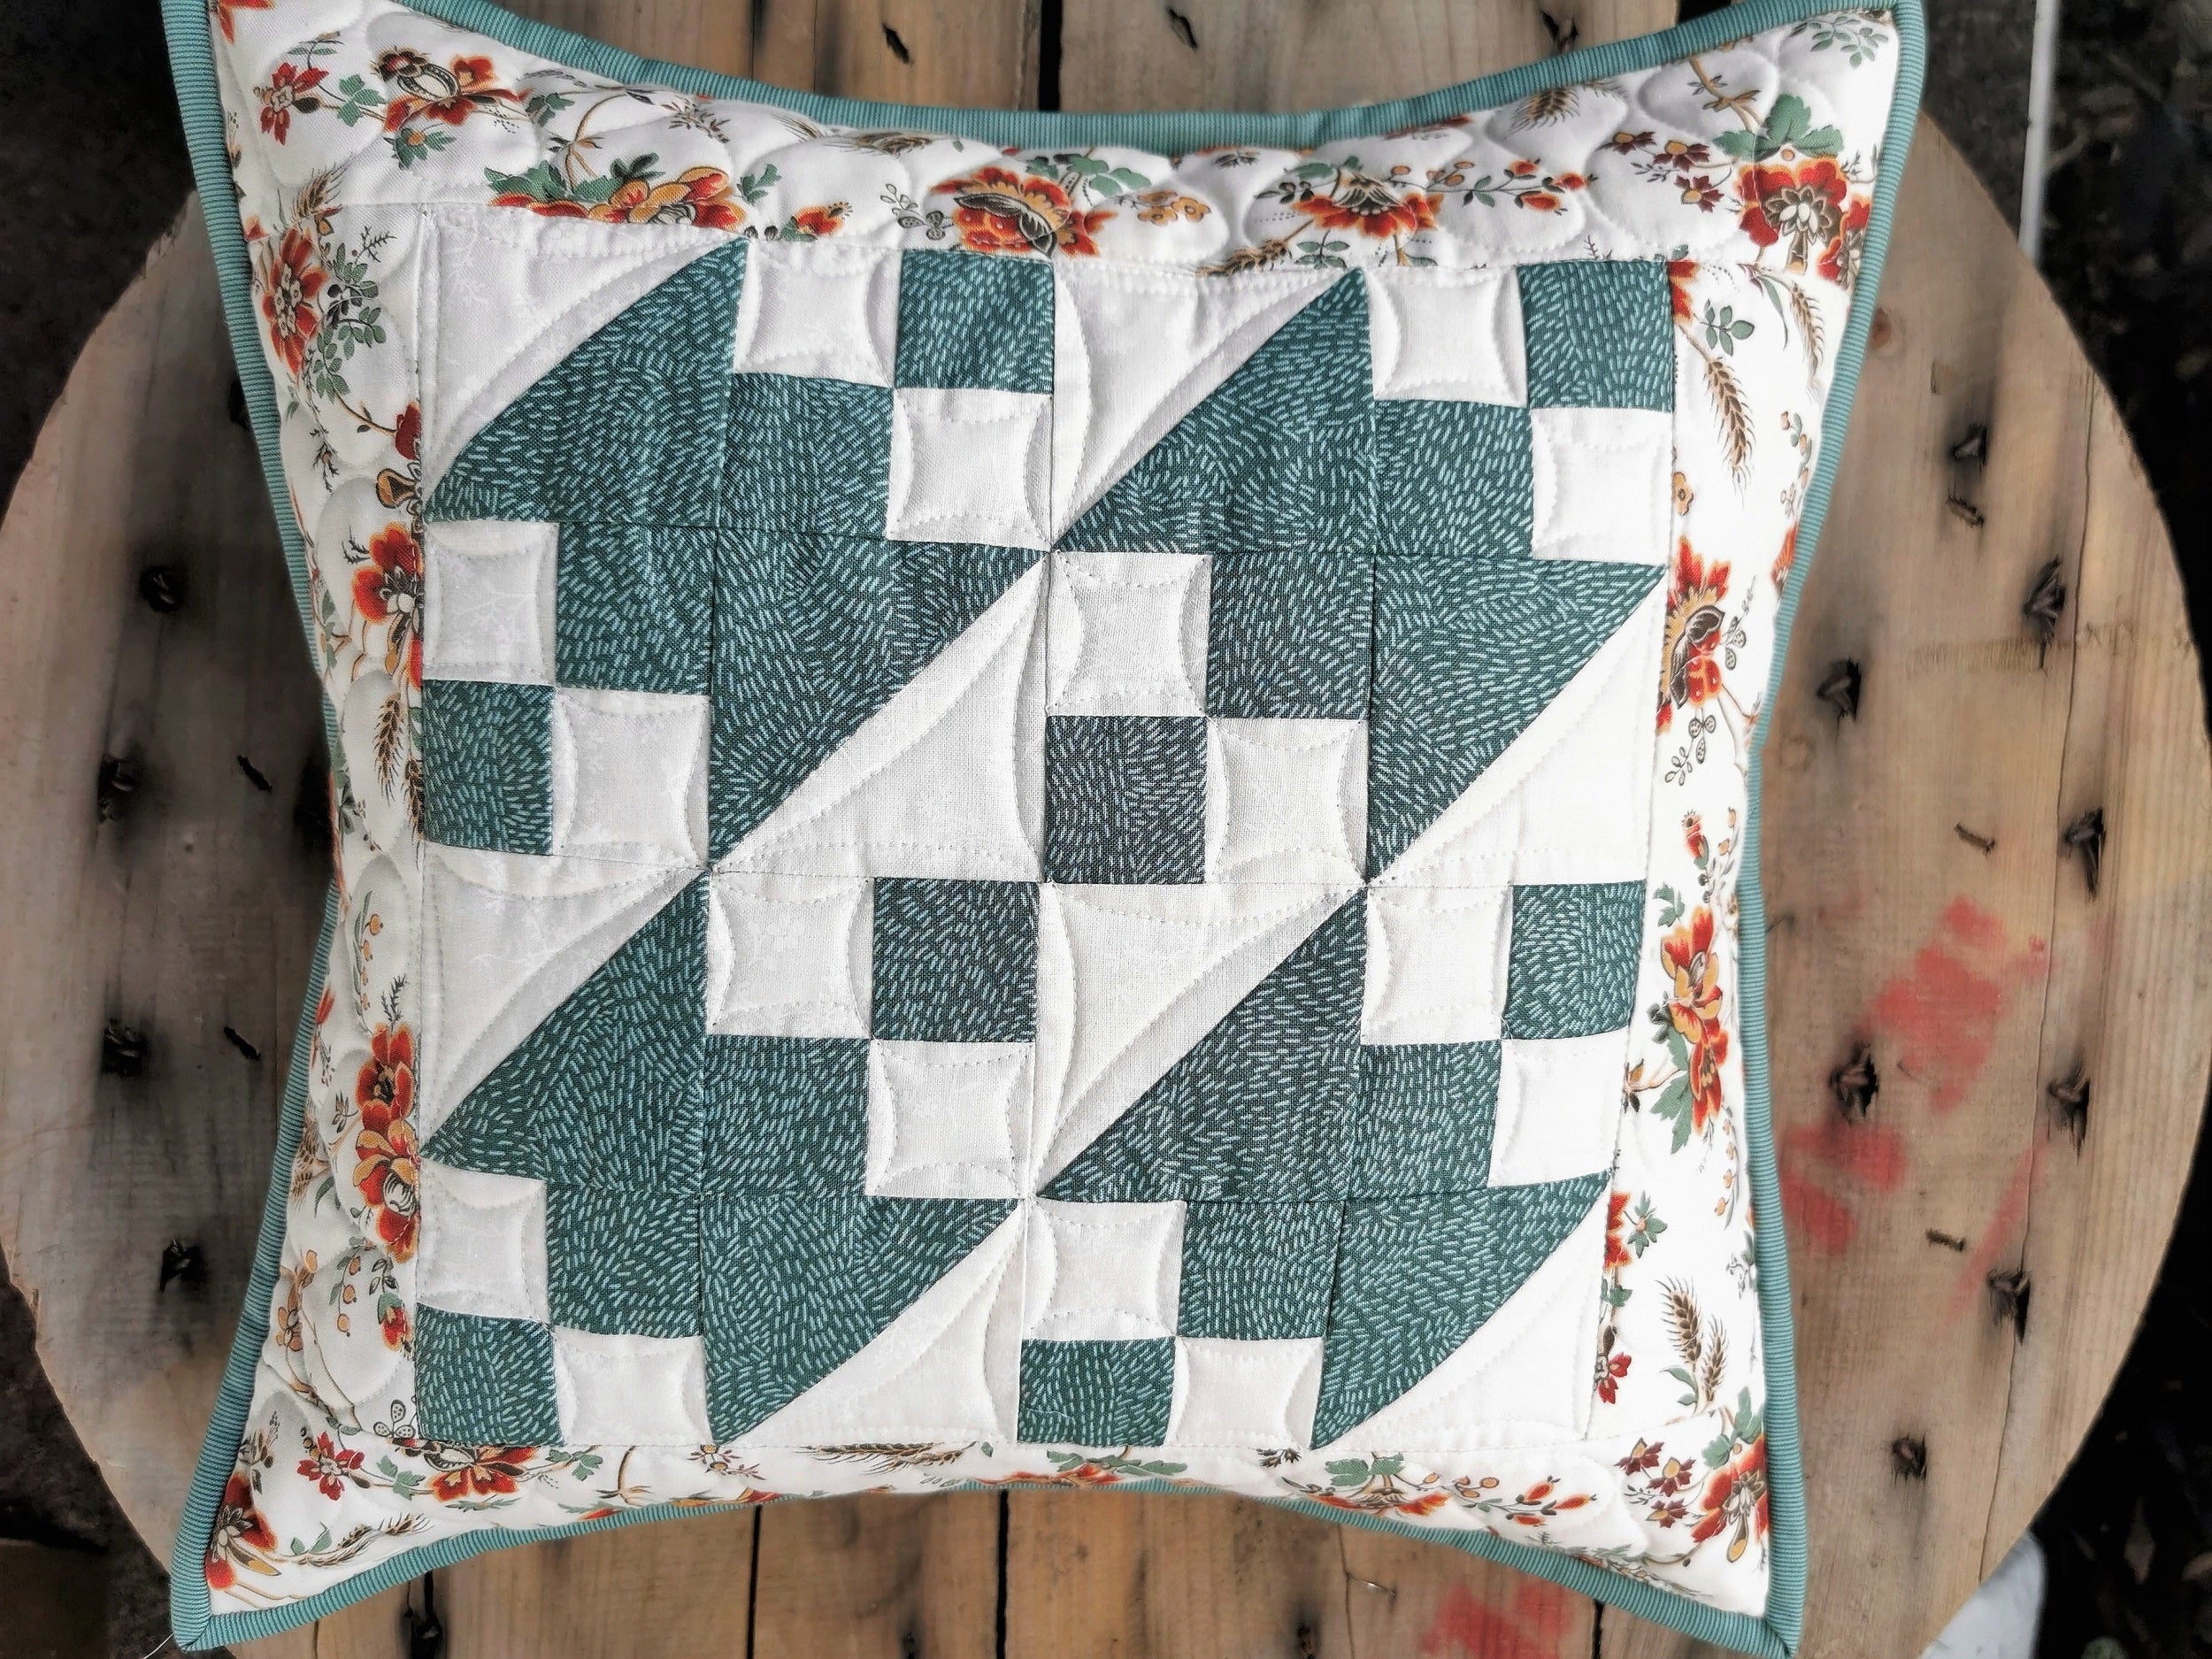 Teal Patchwork Pillow with Floral Border, 14 inch square Throw Cushion